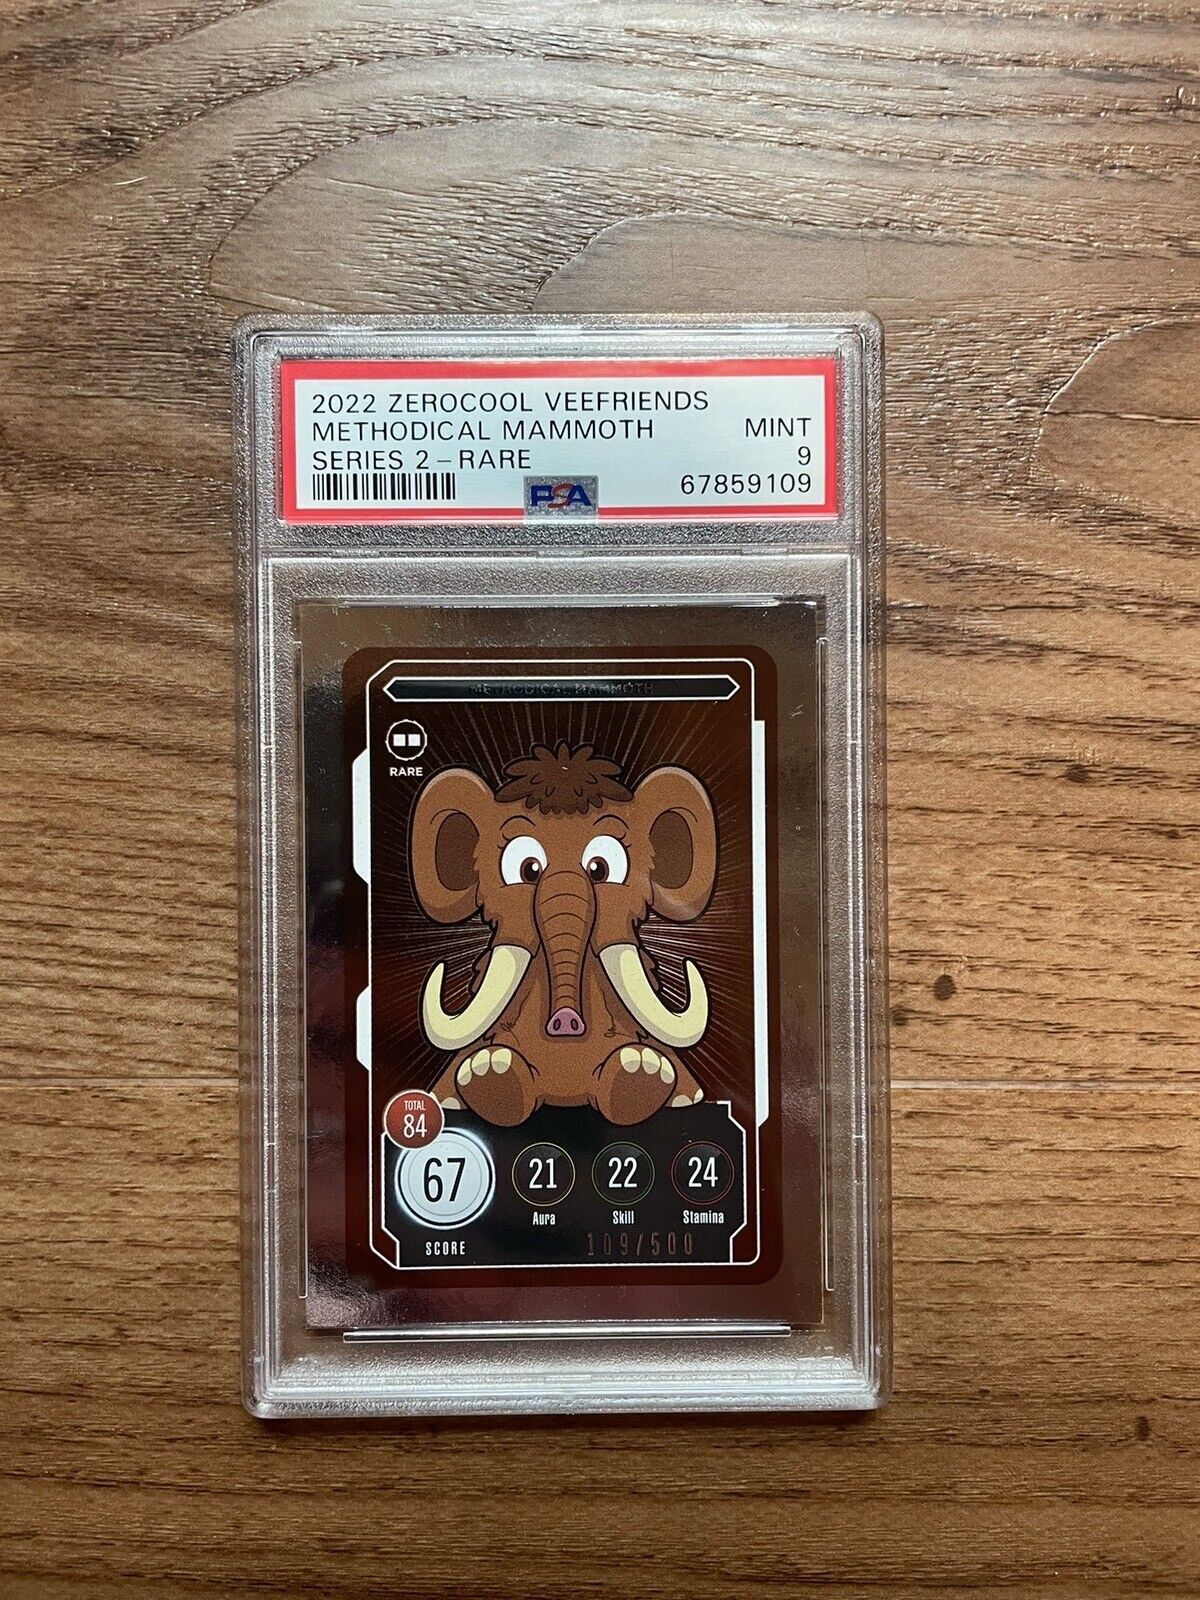 VeeFriends Series 2 Compete & Collect *RARE* Methodical Mammoth 109/500. PSA 9